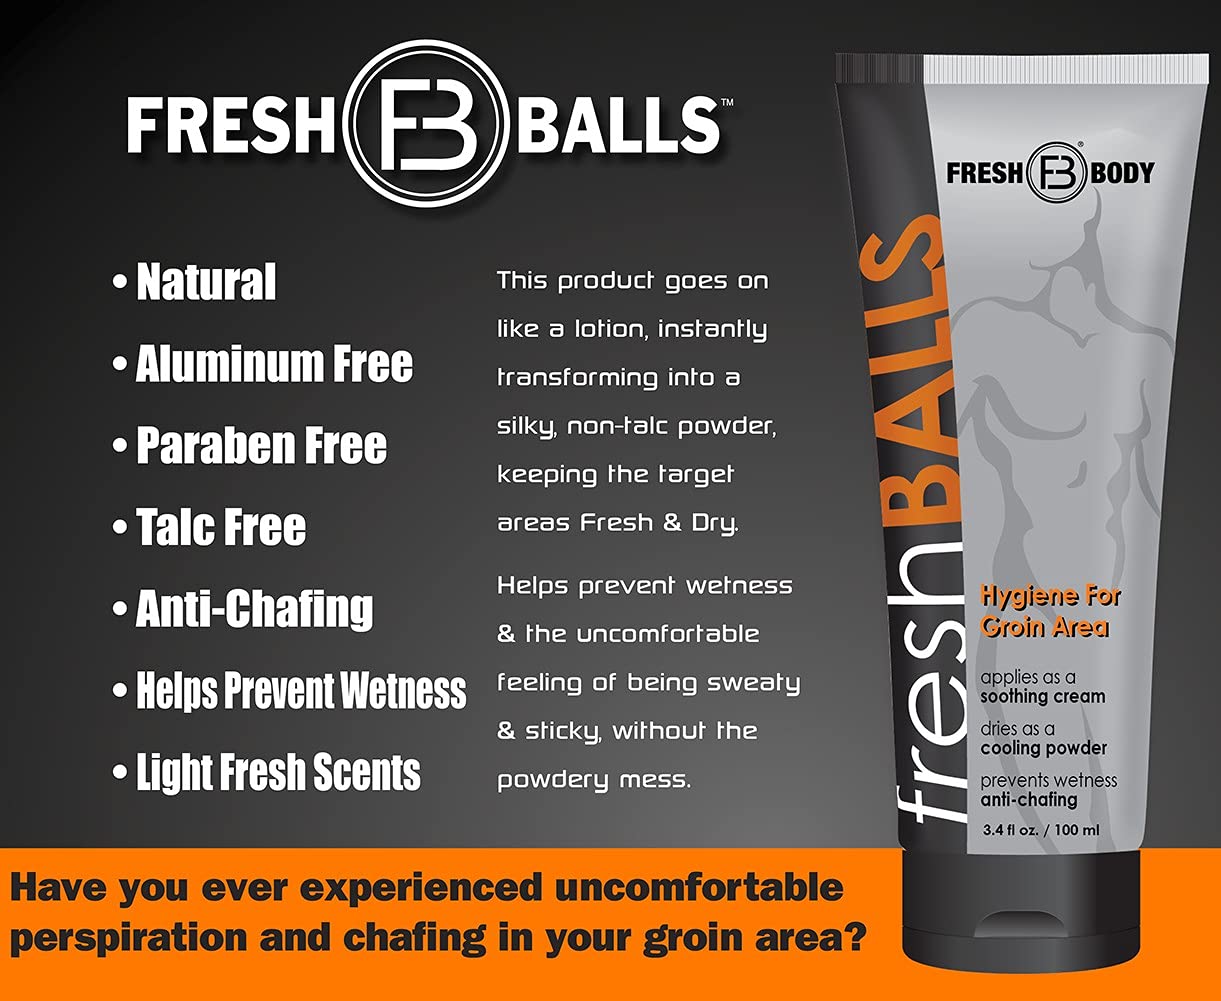 Fresh Body FB Fresh Balls On-The-Go Anti-Chafing Lotion, 0.07 Fl Oz Travel Size Packet (60 Pack) - Men's Soothing Cream to Powder - Ball Deodorant and Hygiene for Groin Area : Beauty & Personal Care